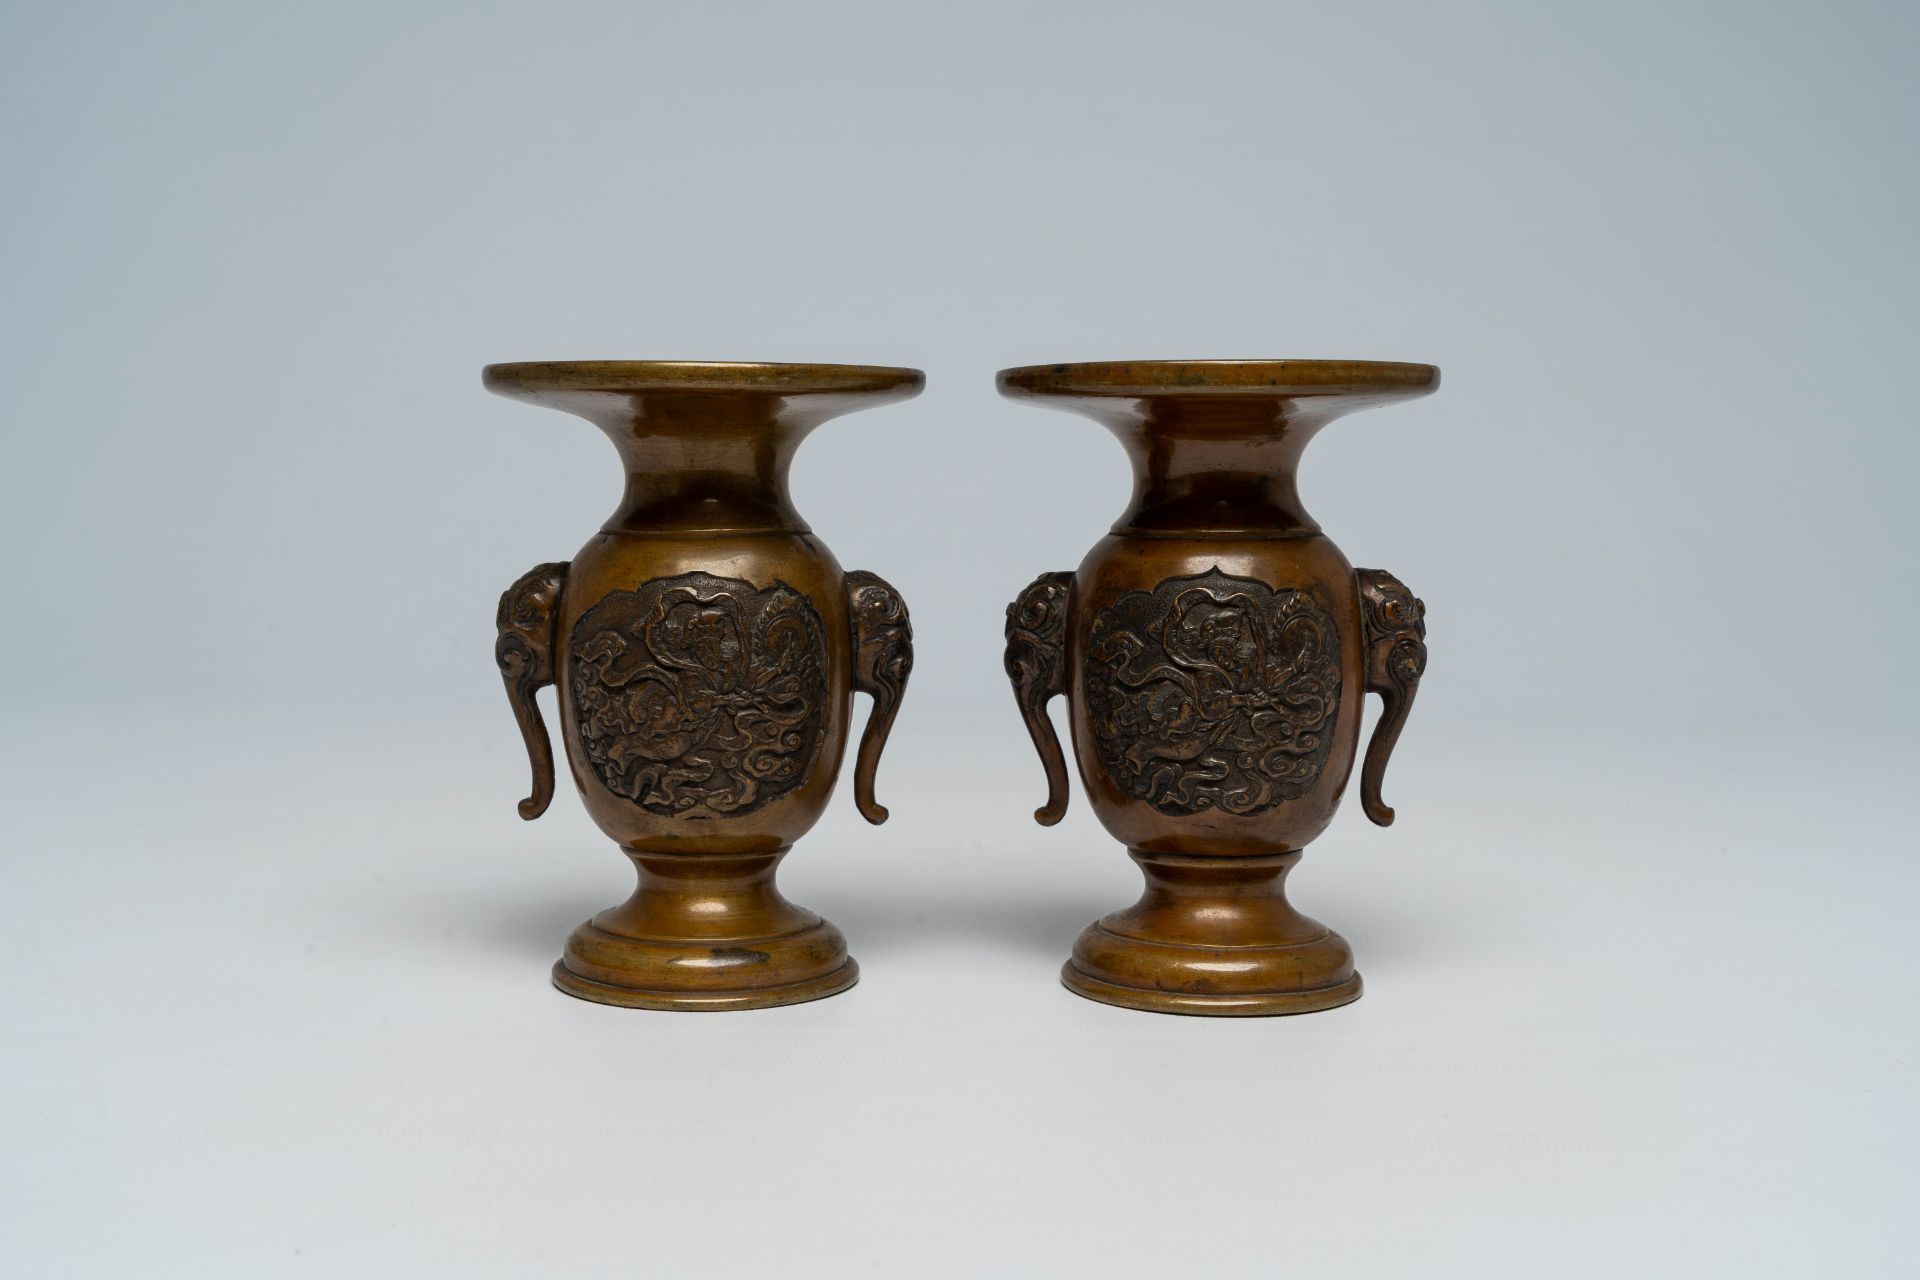 A pair of Japanese bronze vases, two mixed metal chargers with relief design, a blue and white dish - Image 16 of 21